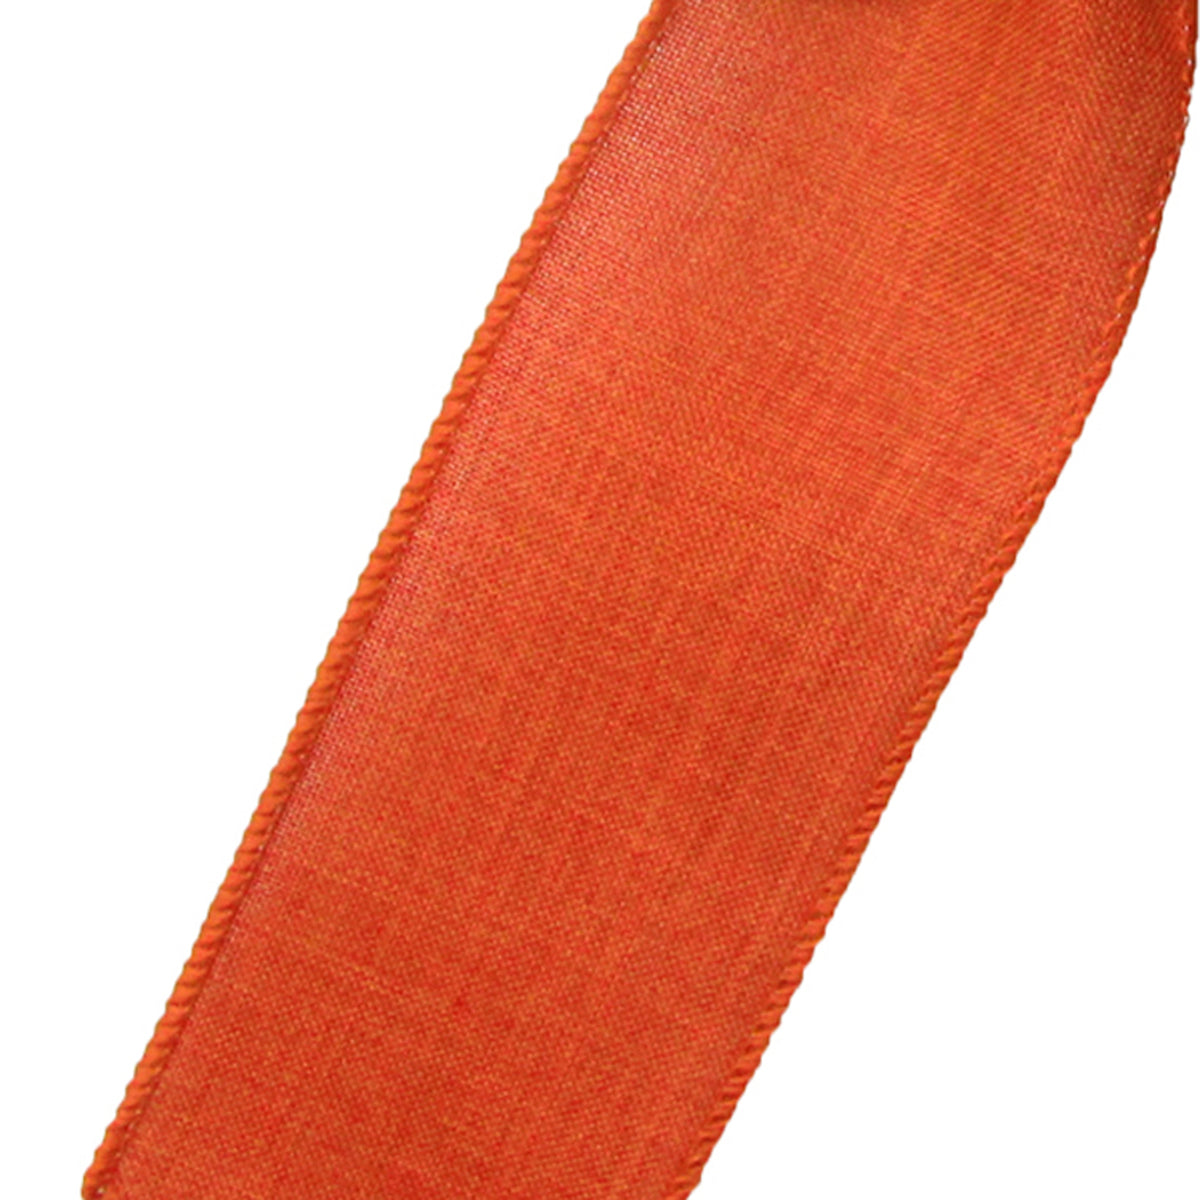 Wired Red Linen Ribbon #40 - 2.5W x 10Yards - Natural Ribbon